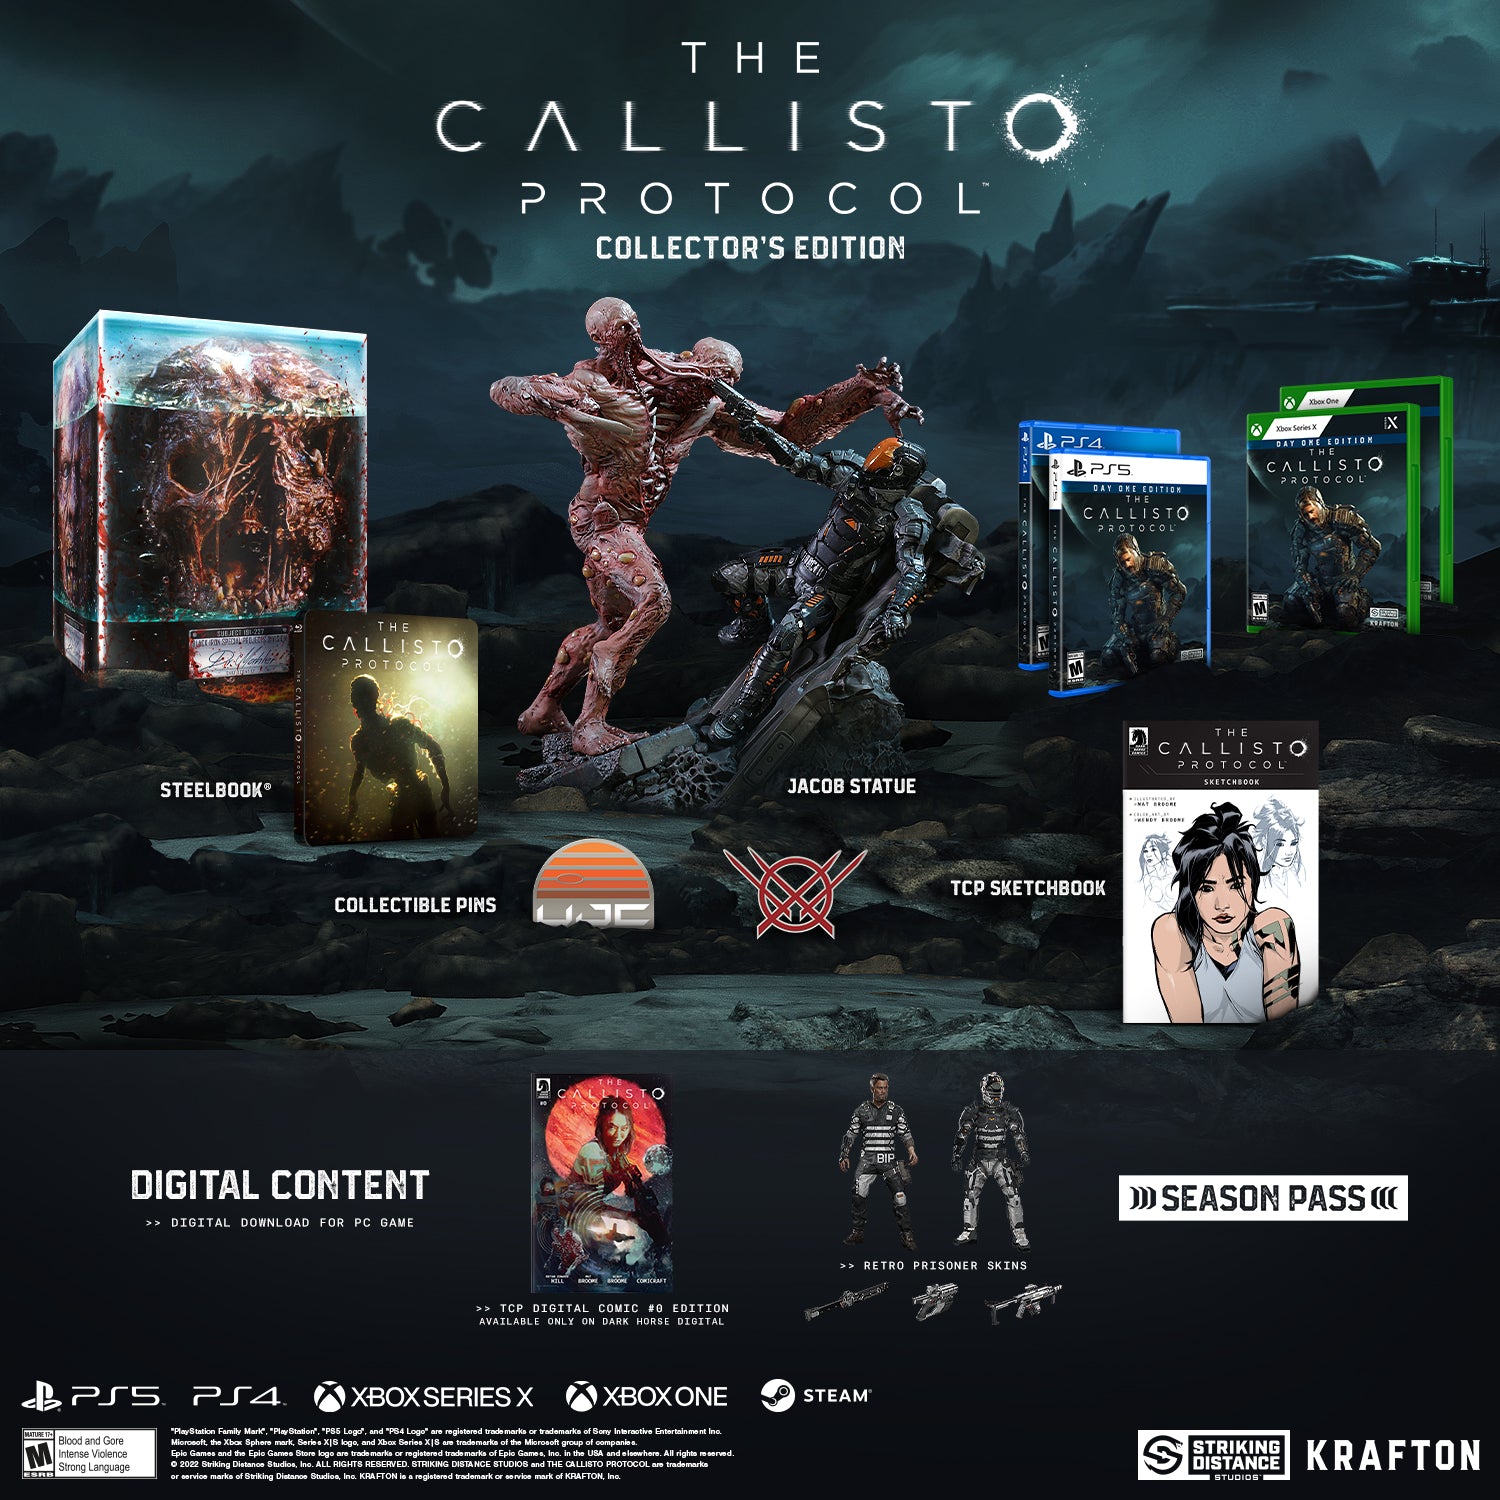 The Callisto Protocol will sell you extra death animations as DLC